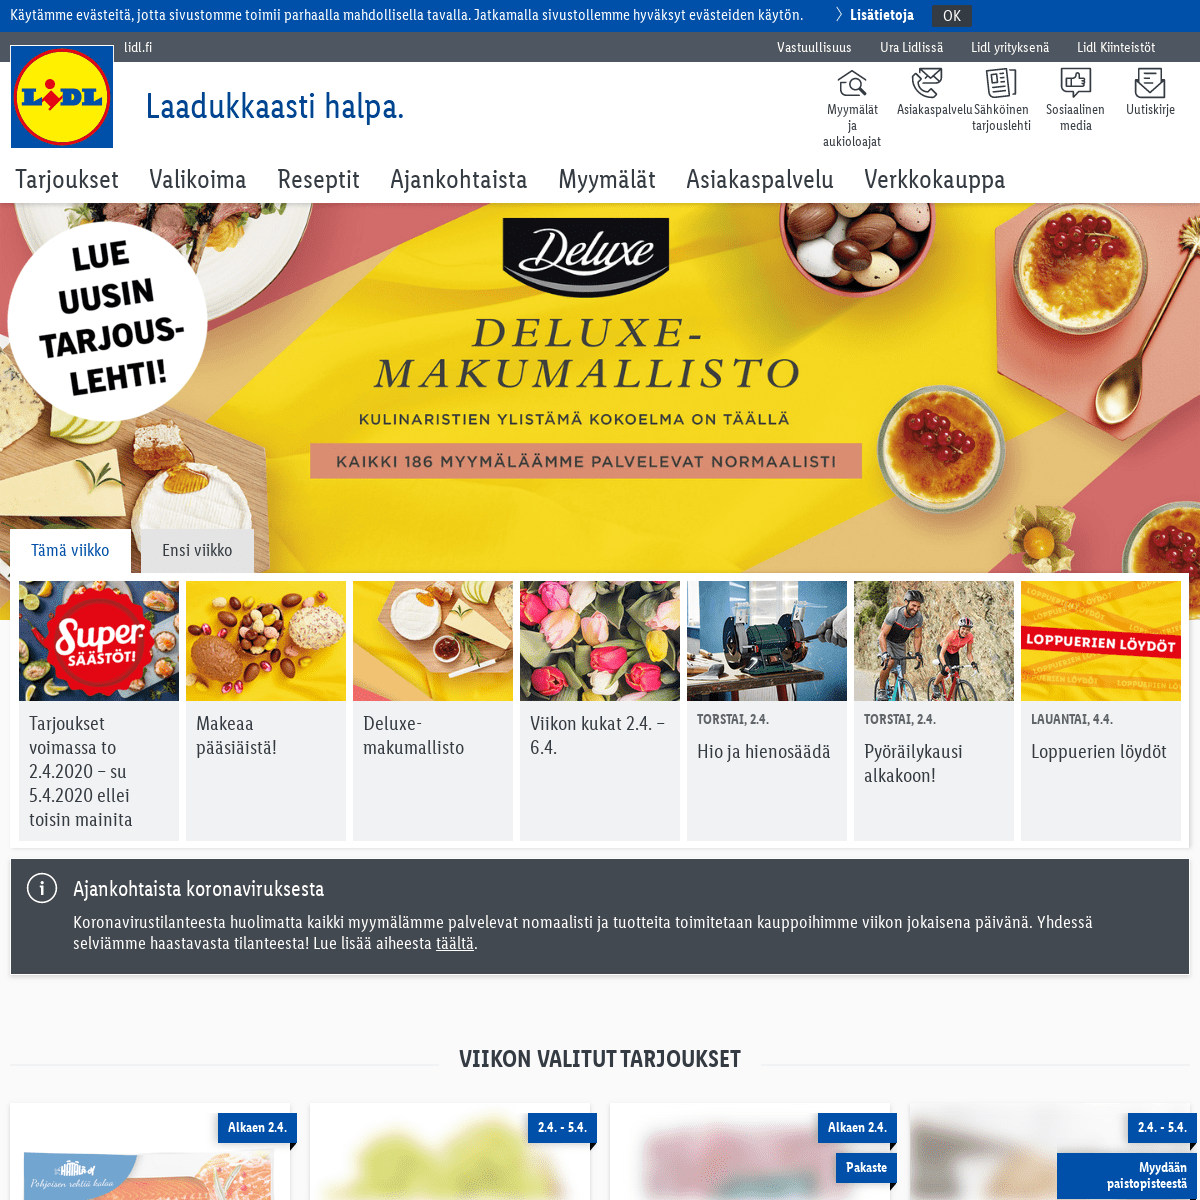 A complete backup of lidl.fi